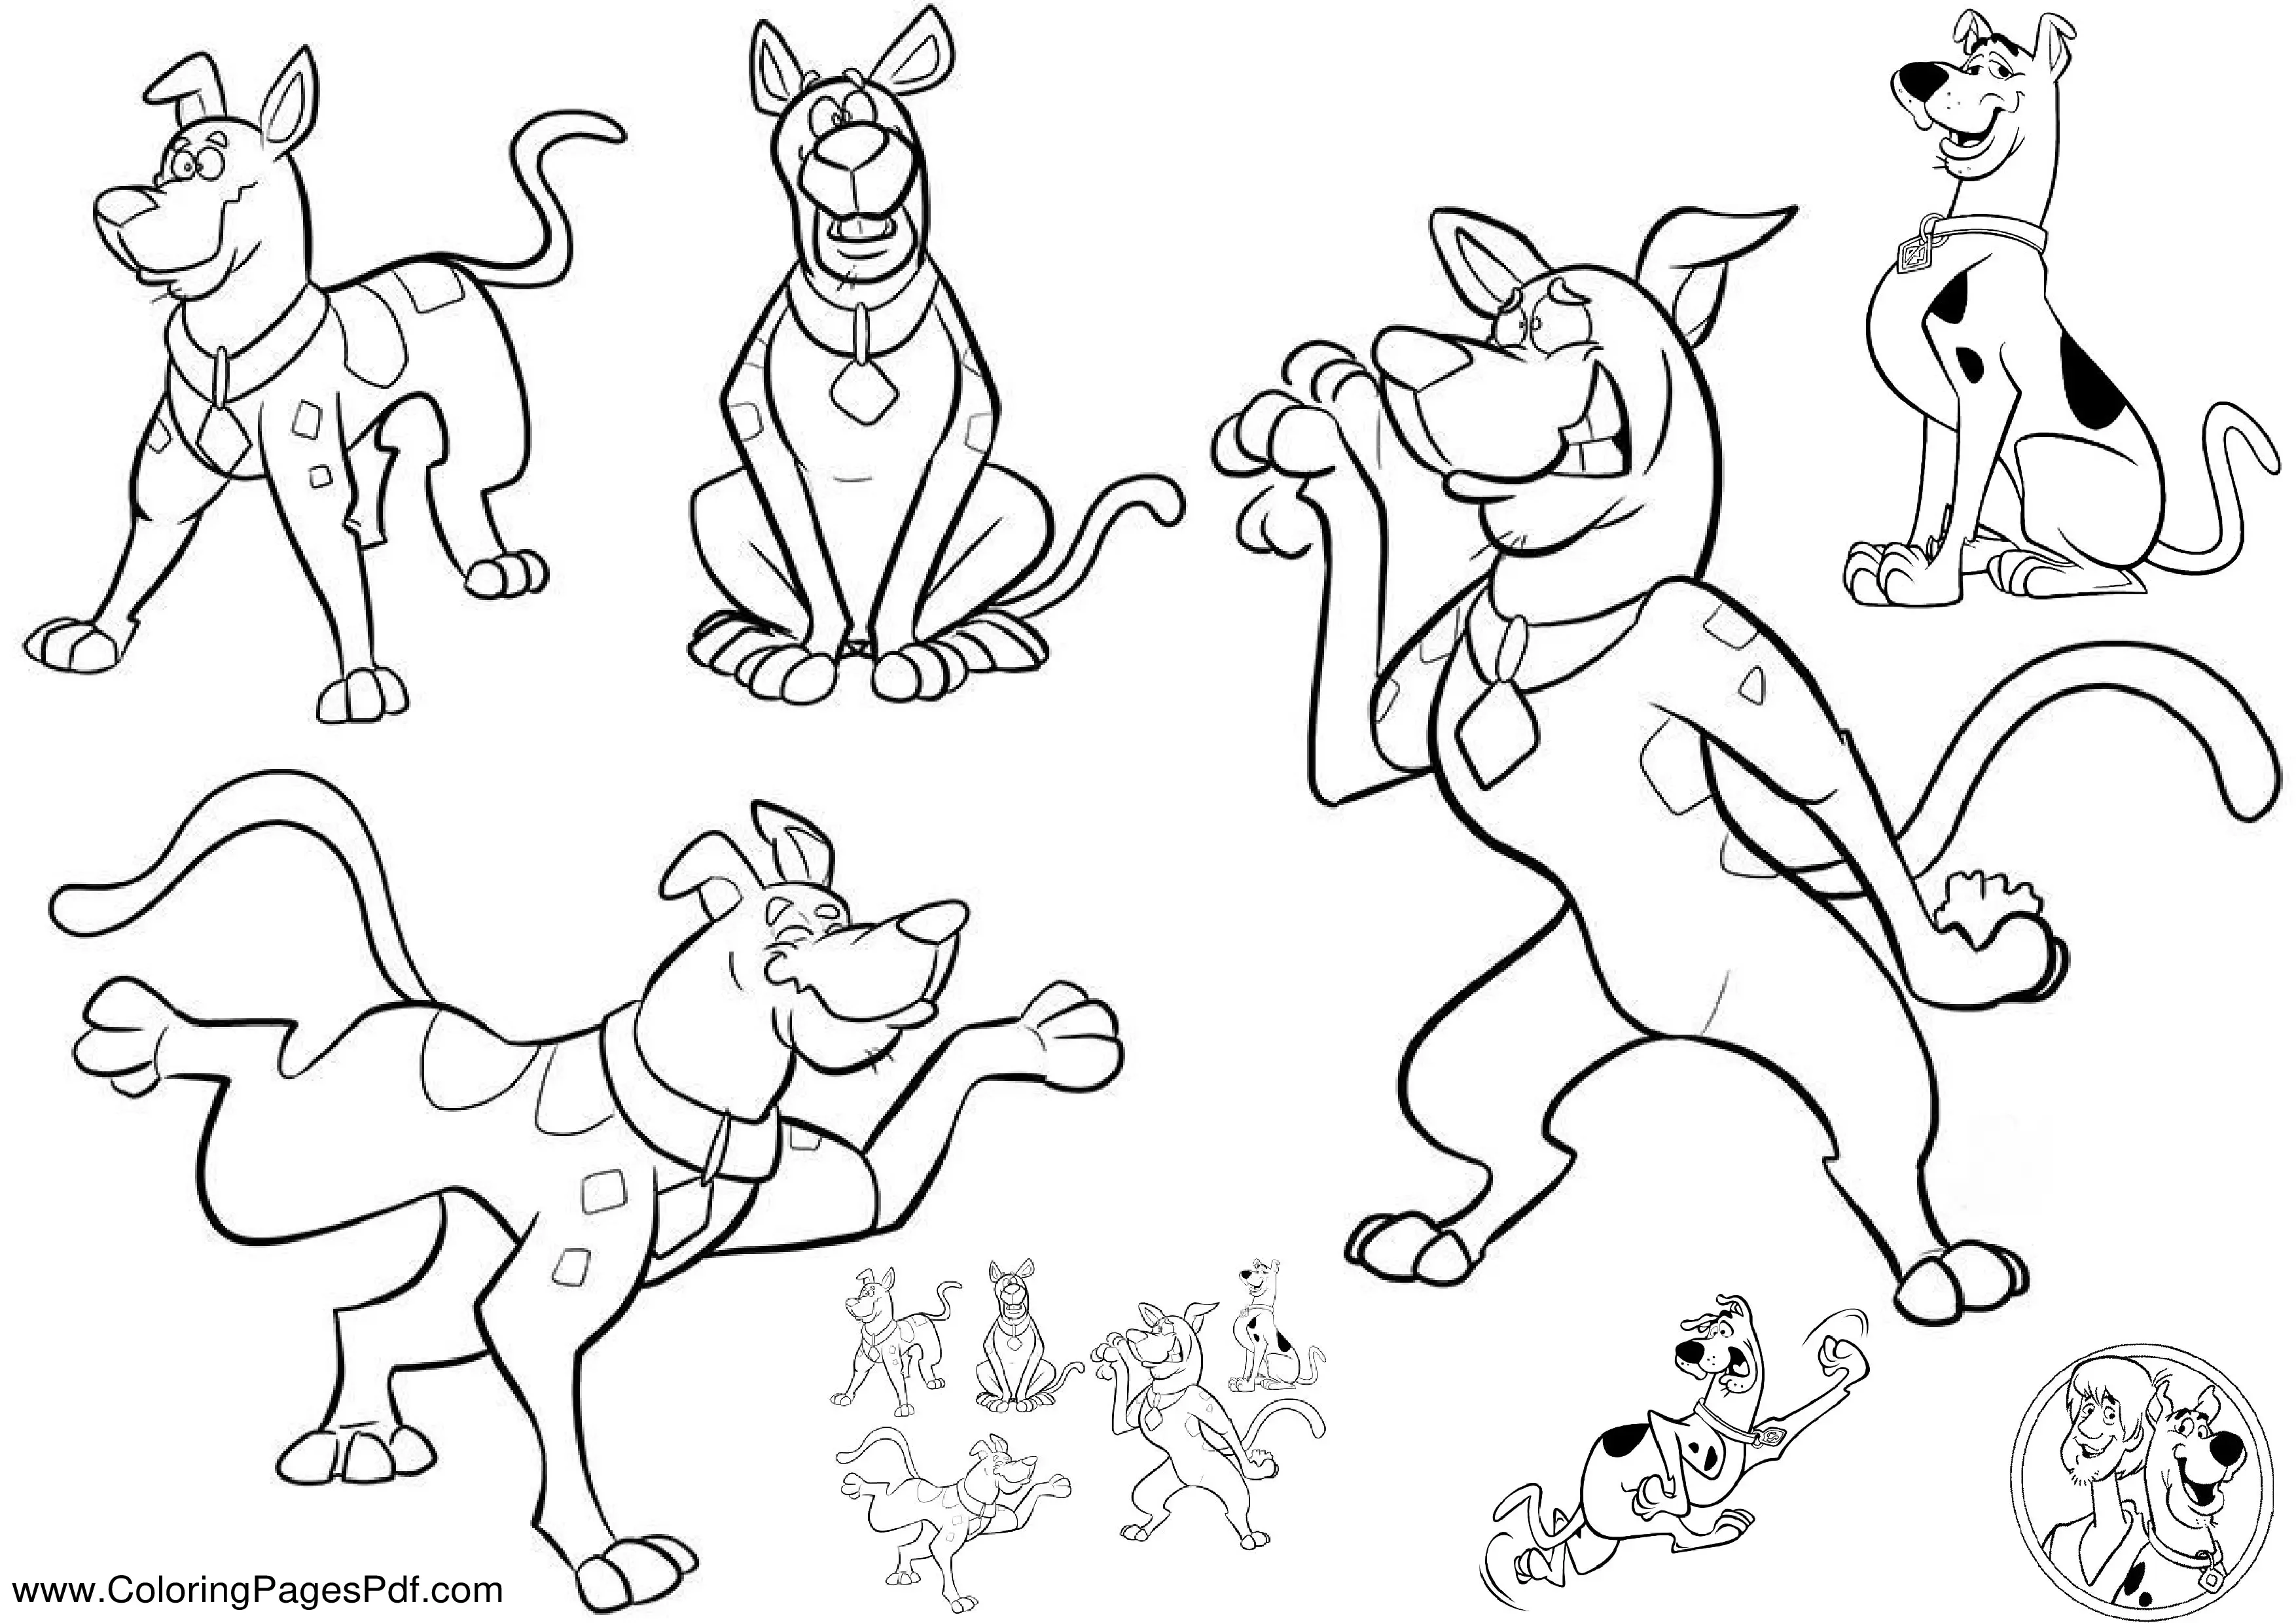 Scooby doo coloring pages easy